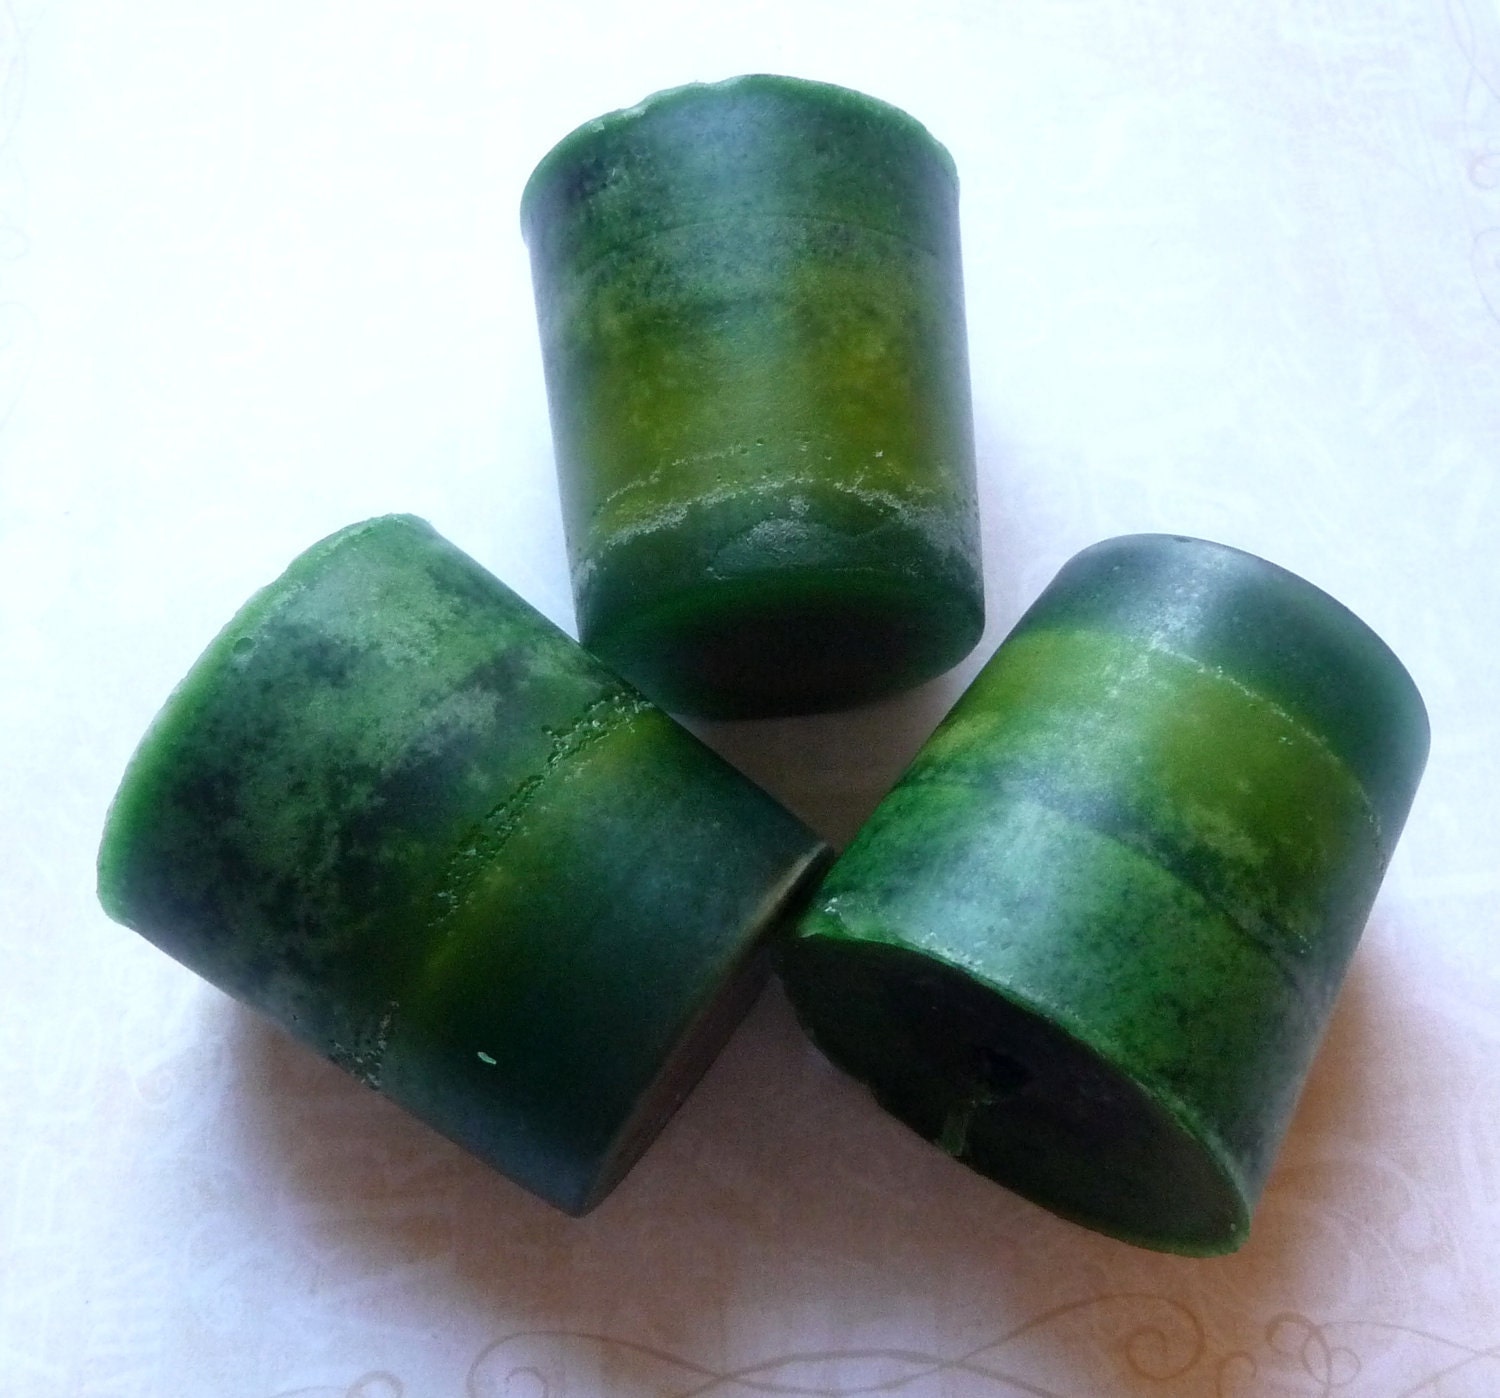 3 Green Votive Candles, Herb and Citrus Scent - Mylana